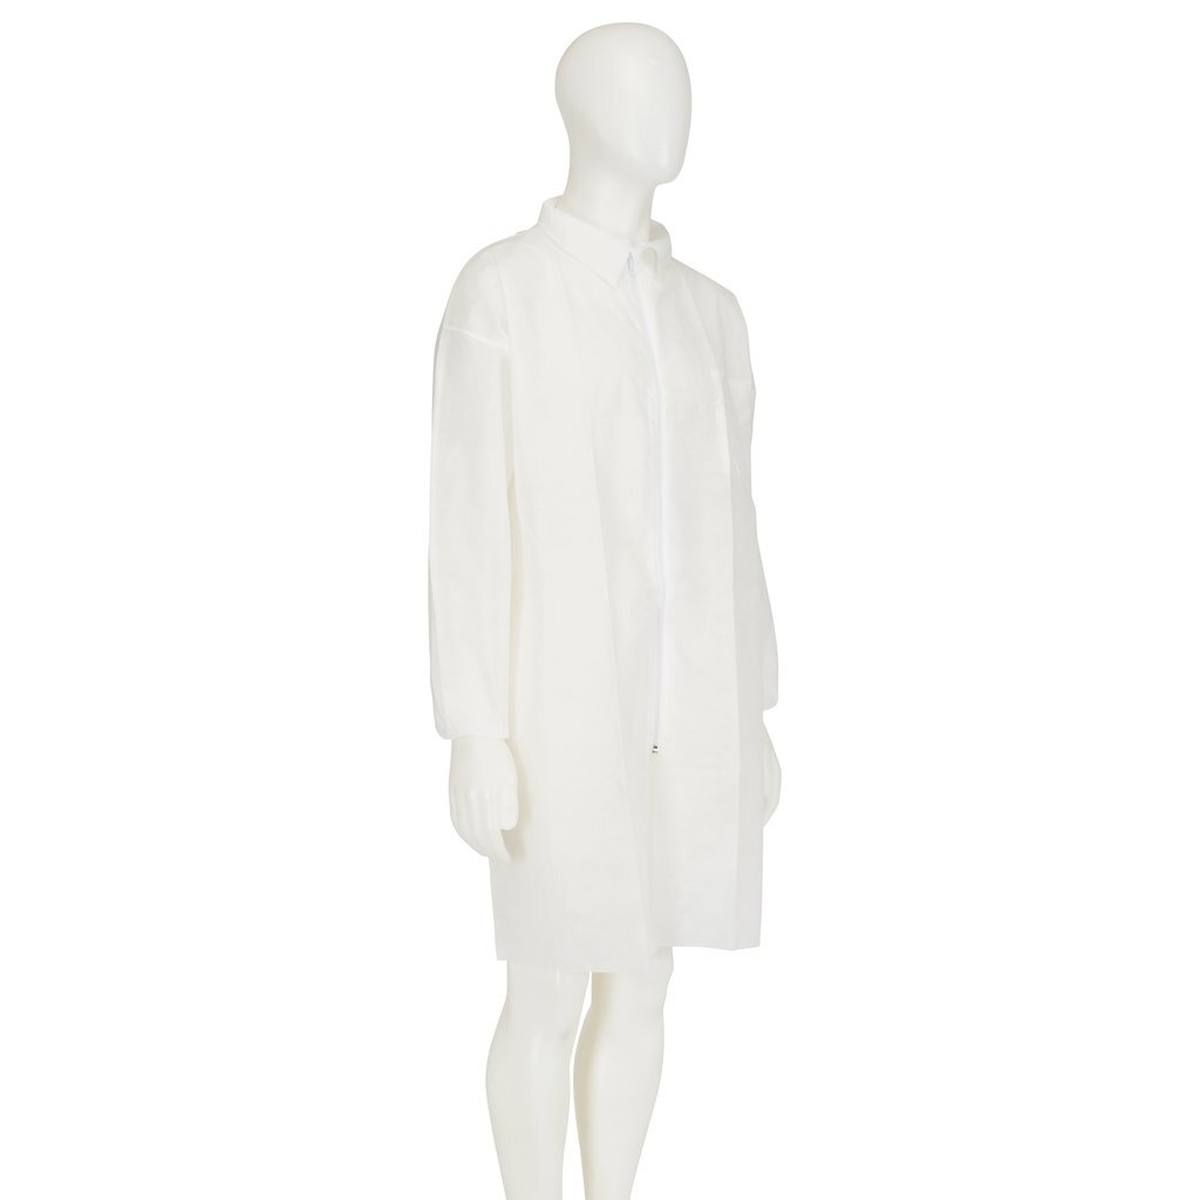 3M 4400 Coat, white, size M, material 100% polypropylene, breathable, very light, with zip fastener